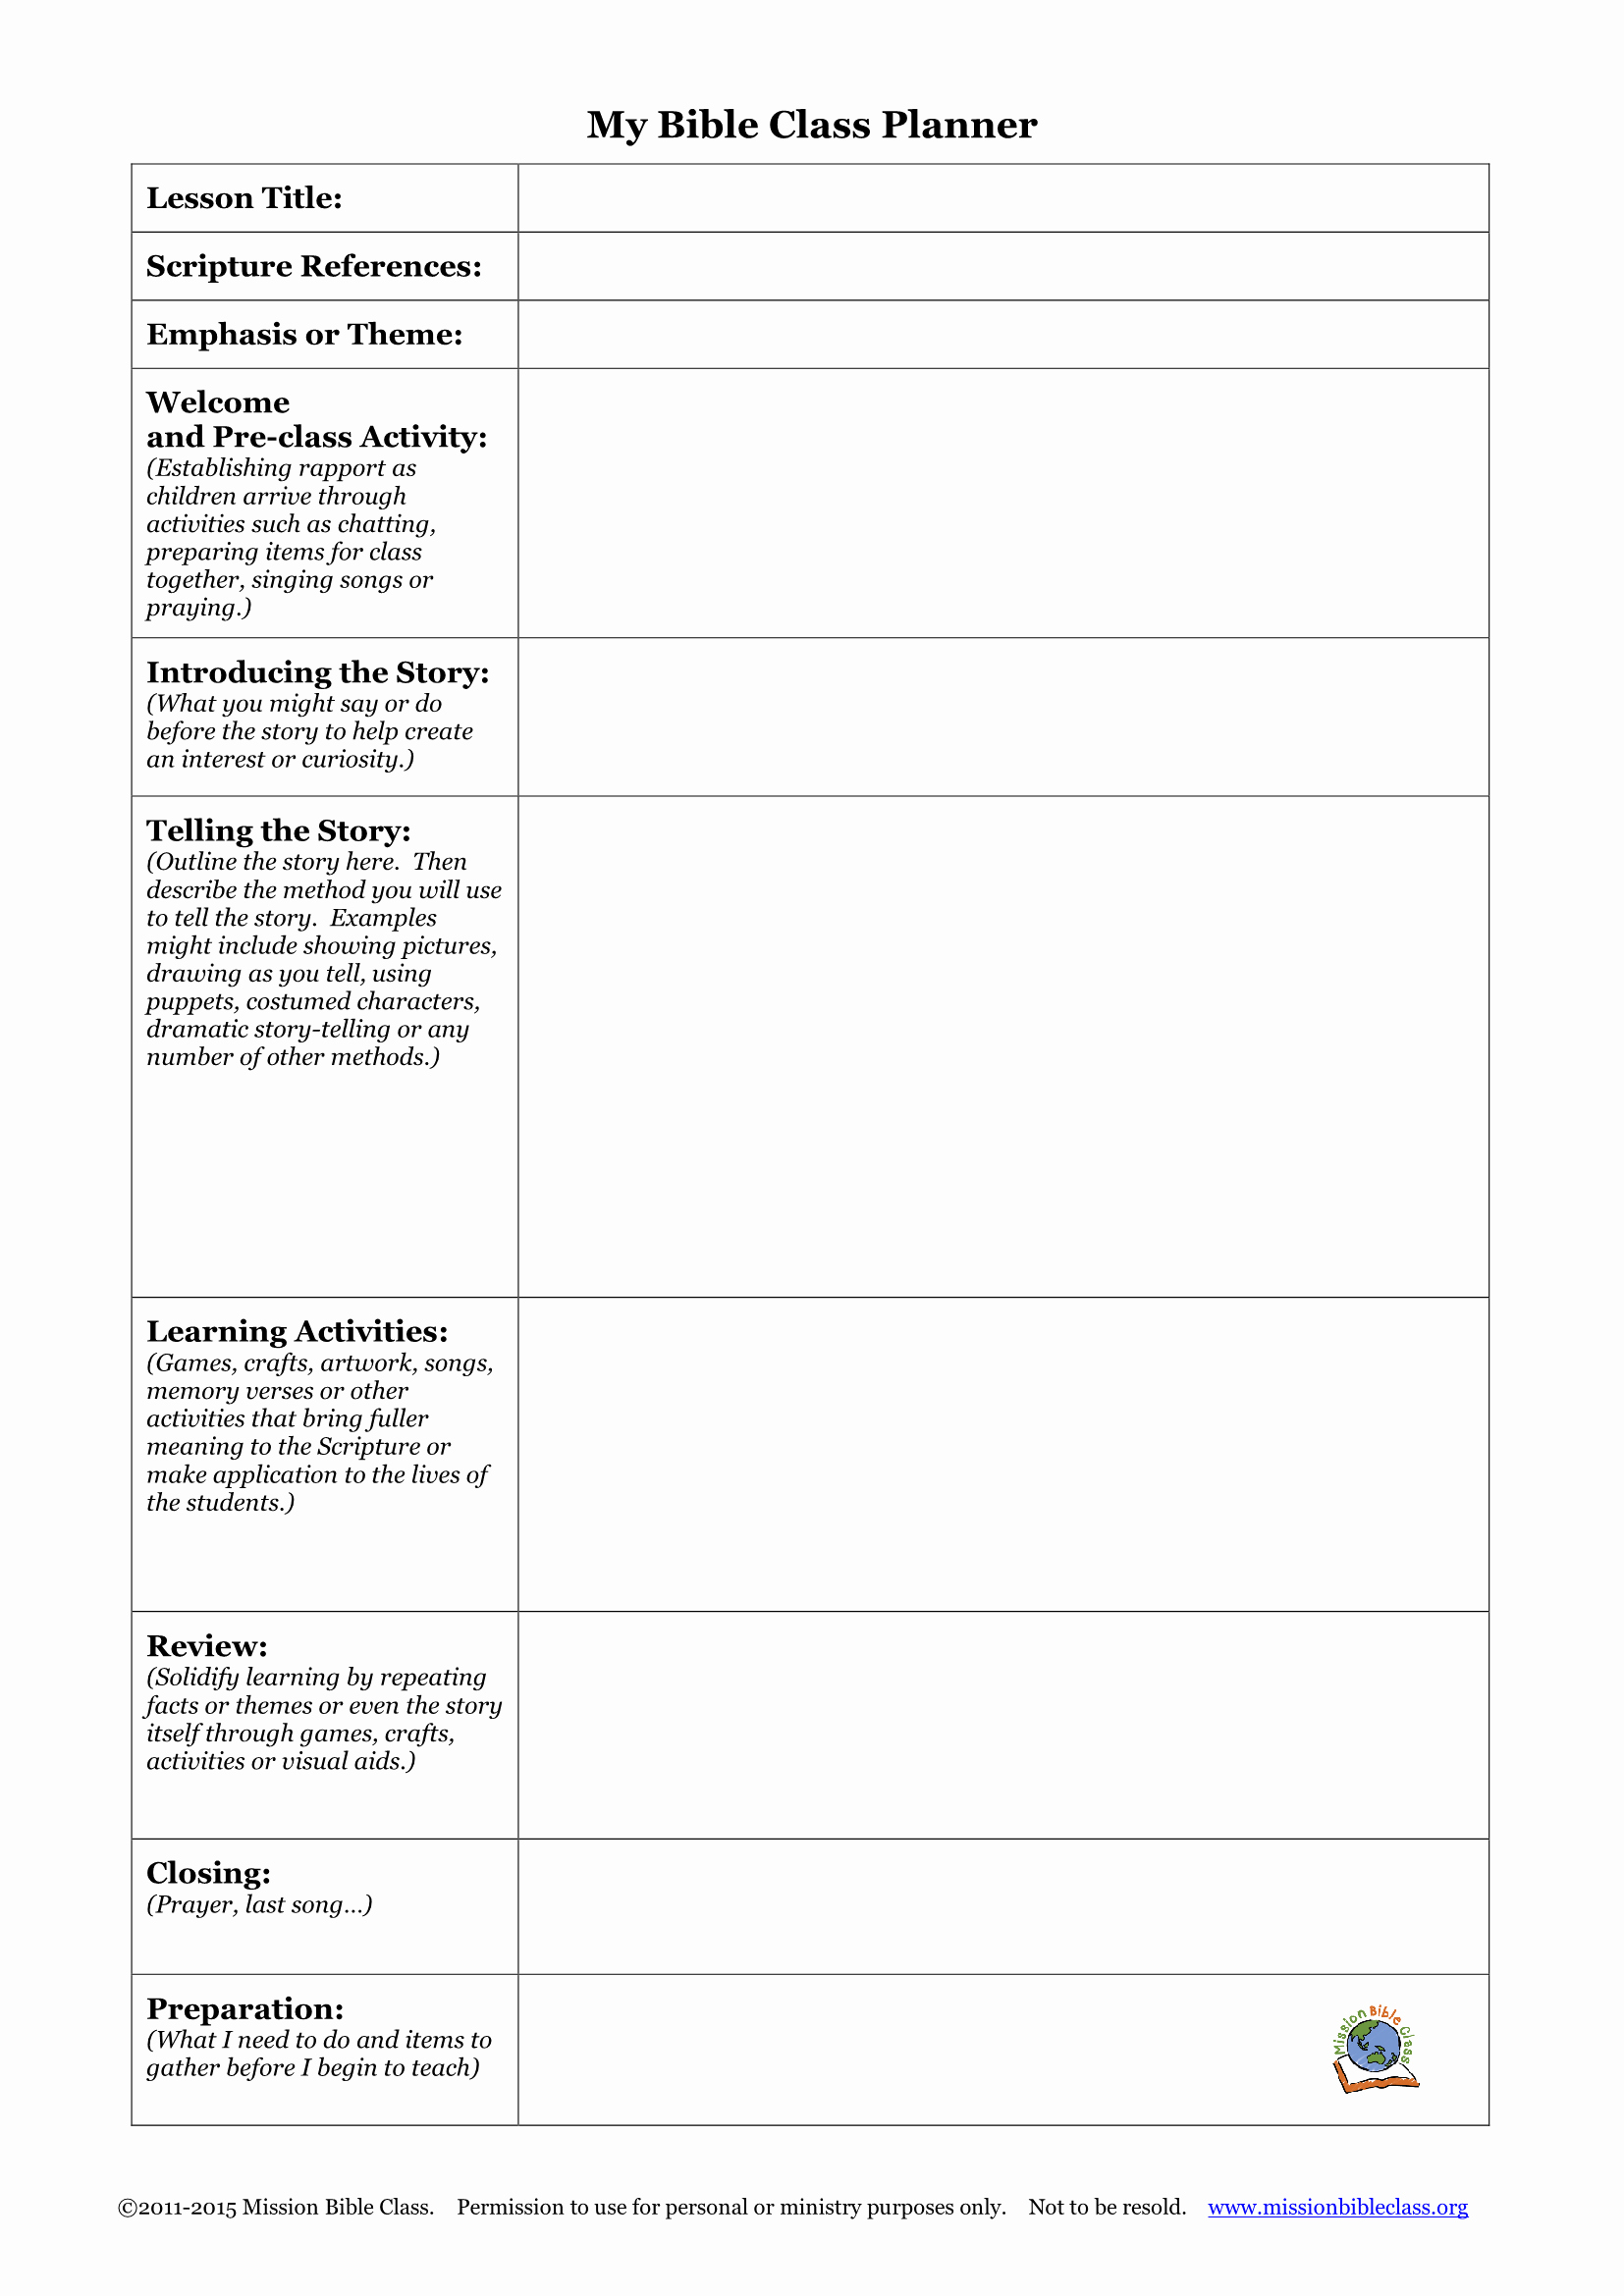 Church event Planning Worksheet Inspirational English Lesson Plan Templates – Mission Bible Class